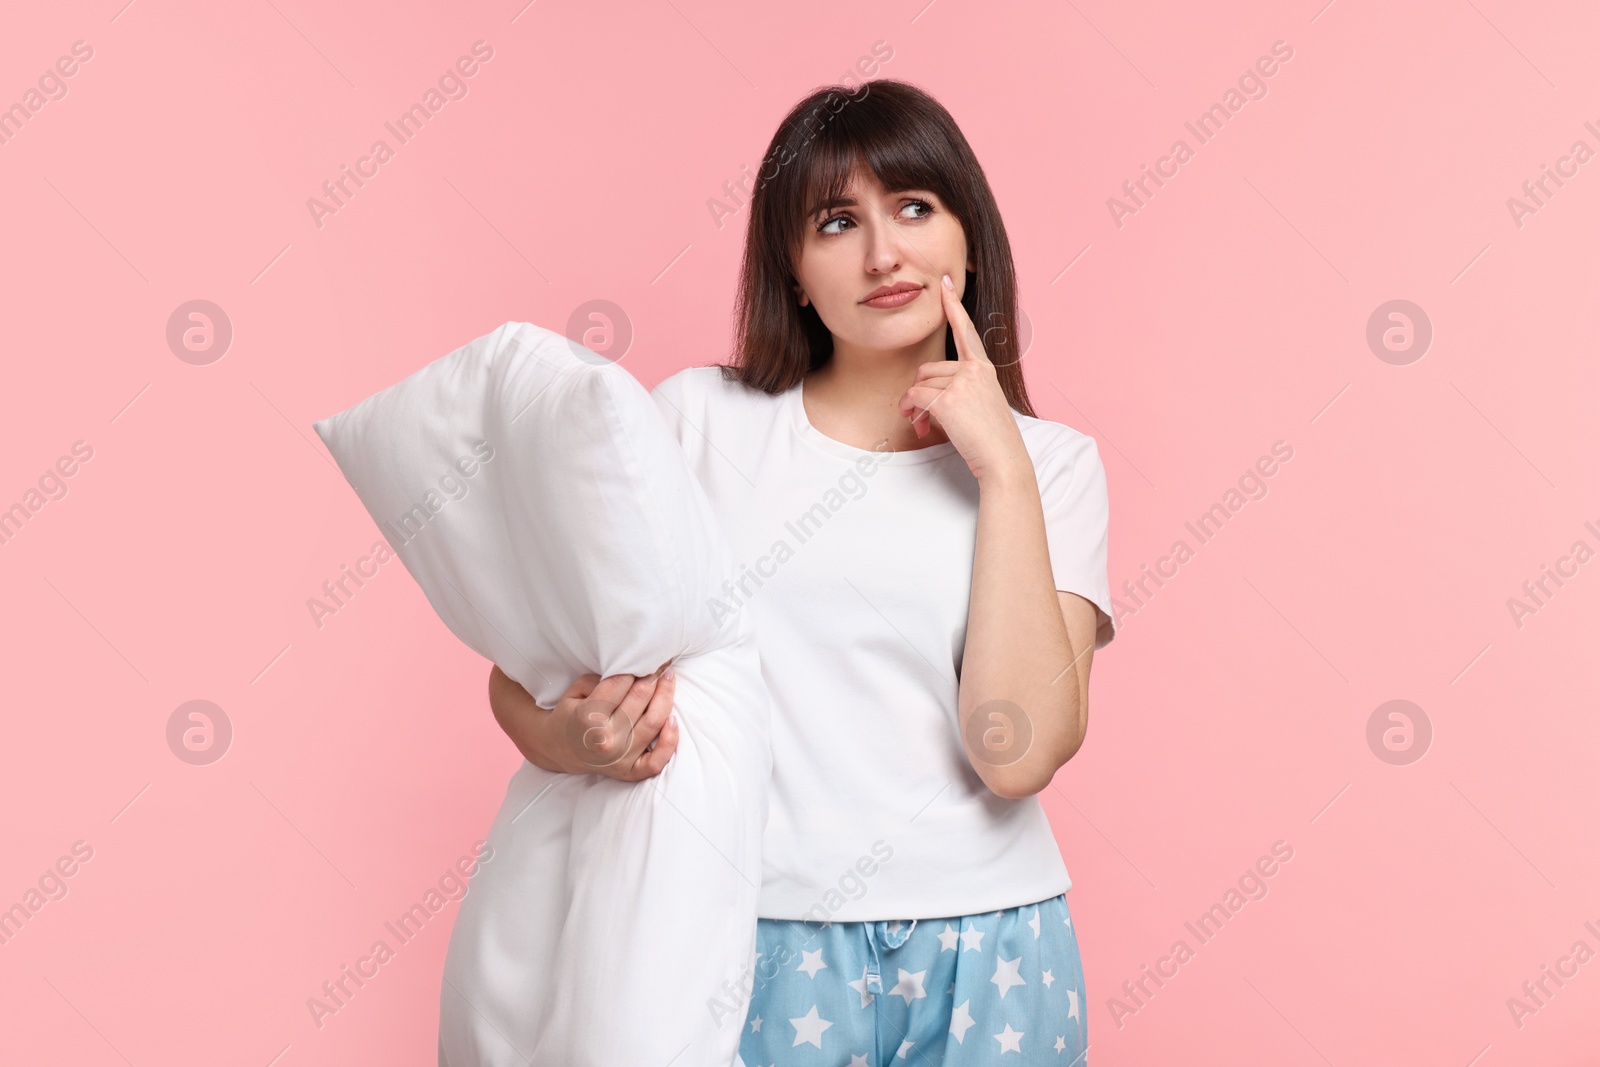 Photo of Woman in pyjama holding pillow on pink background